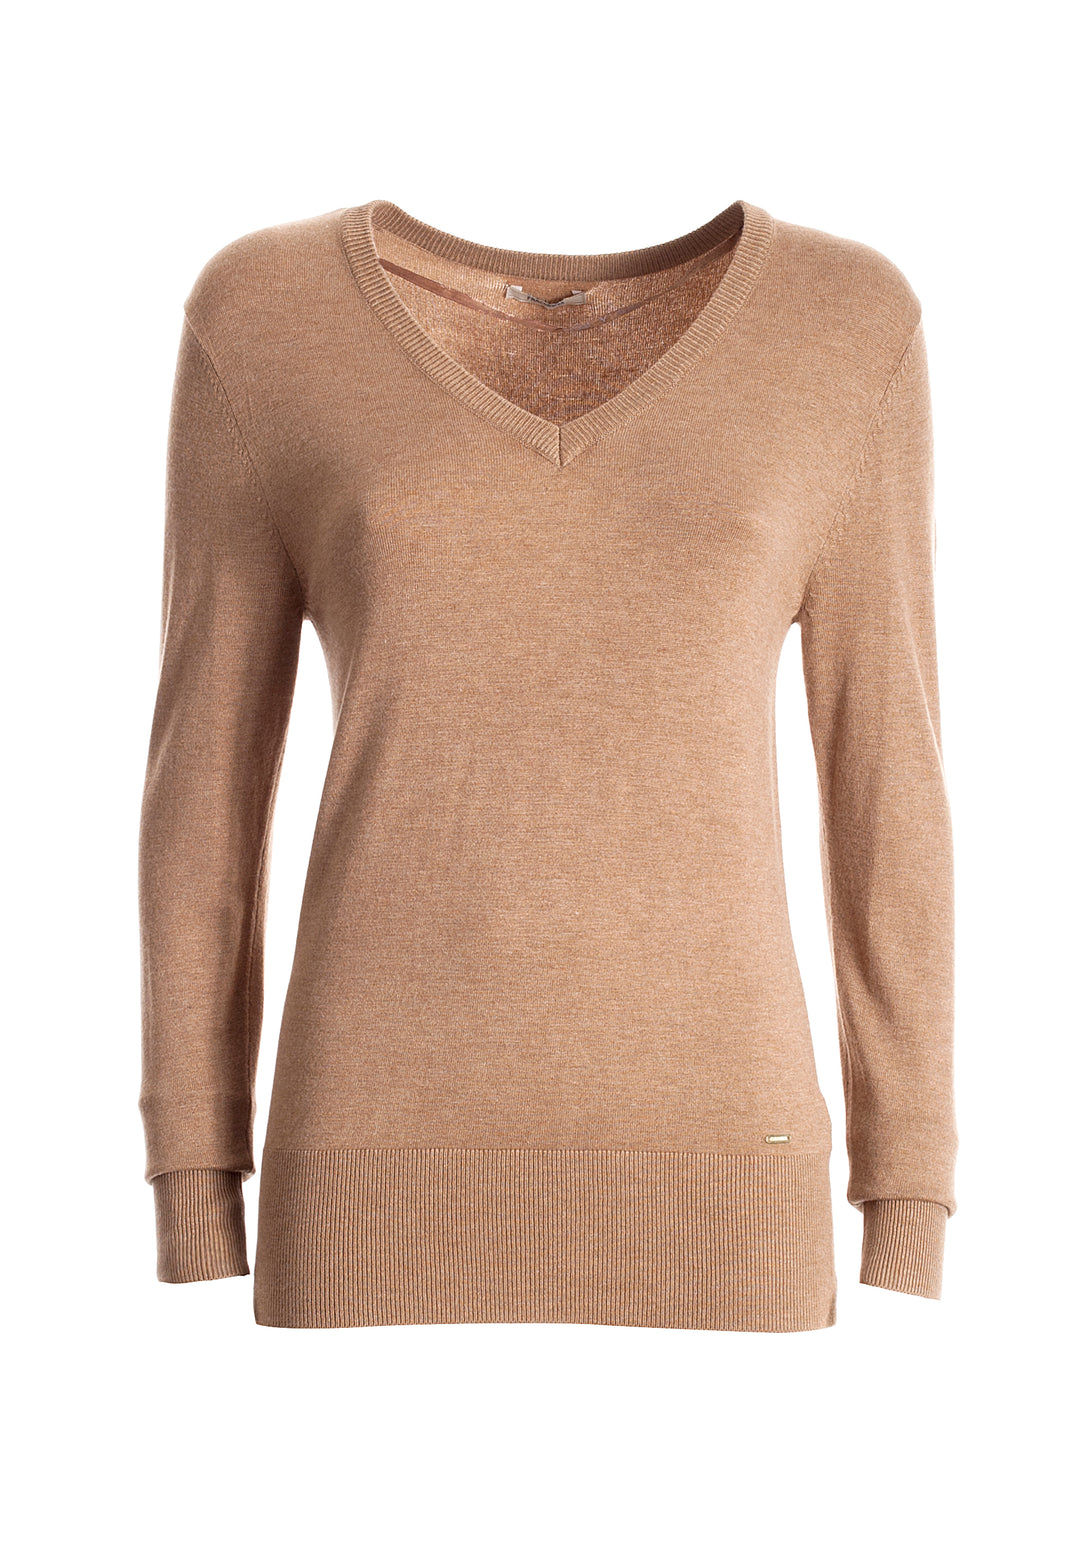 Knitwear tight fit with V-neck drop